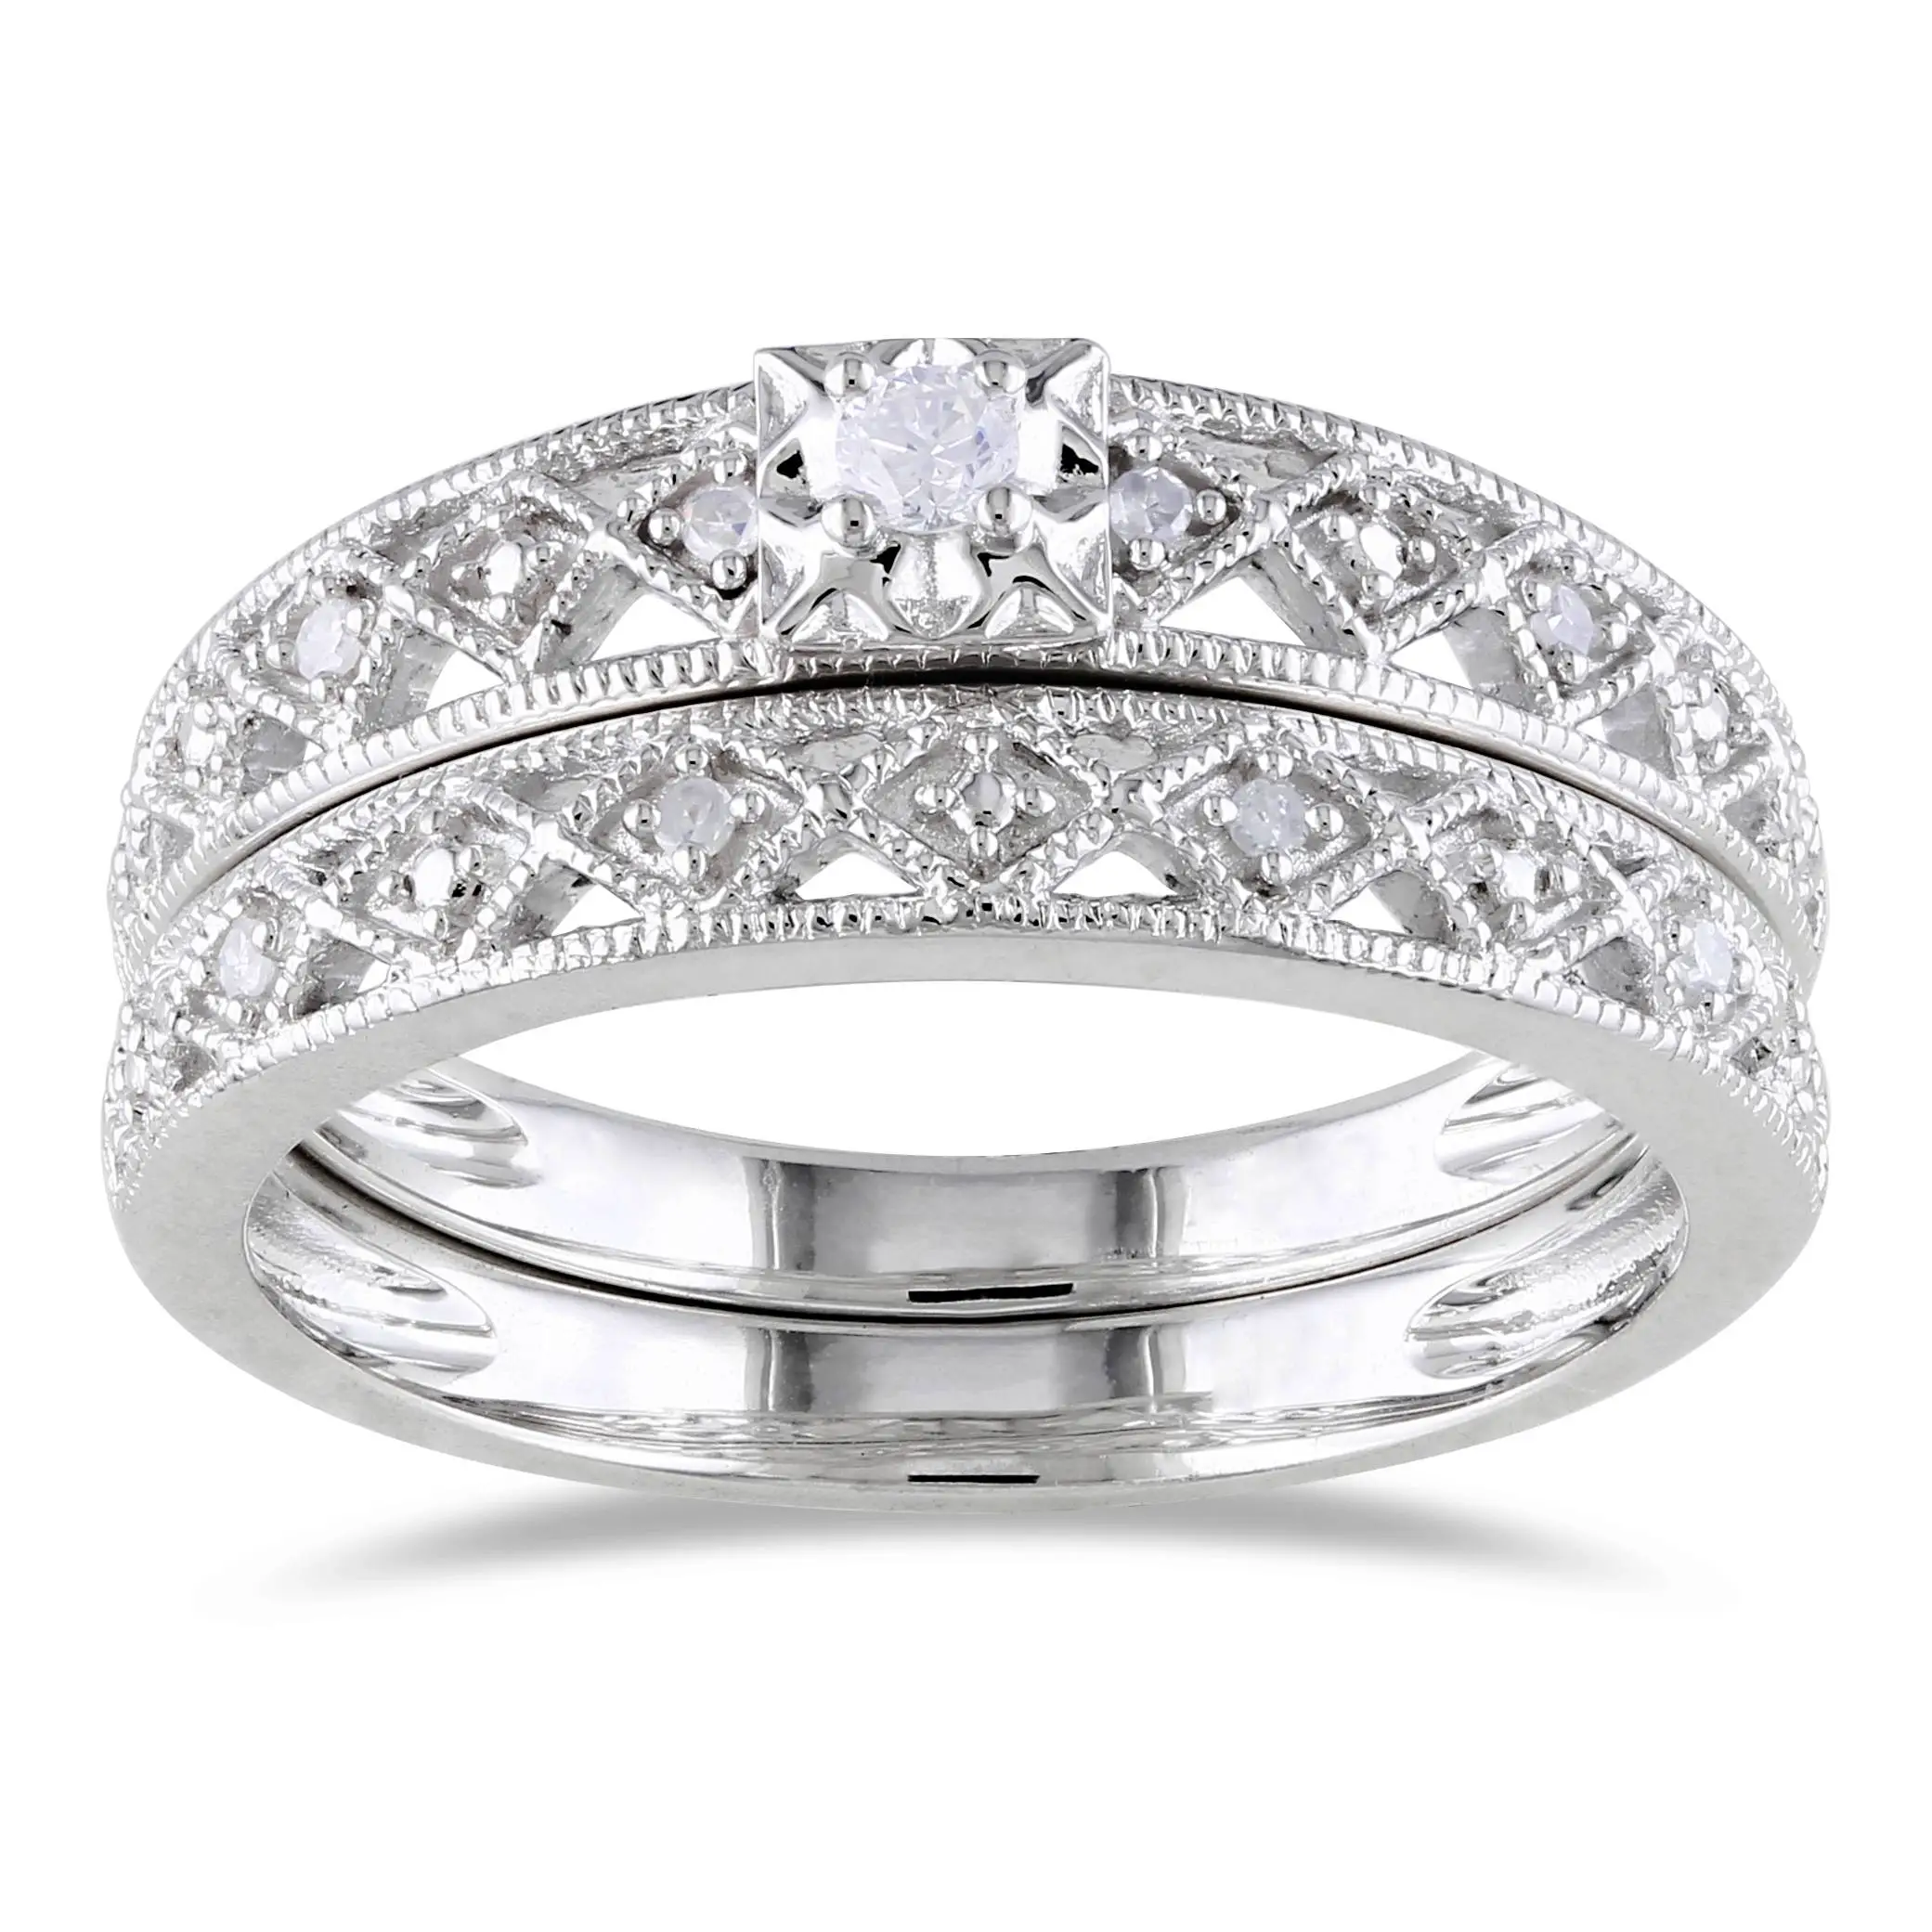 The 15 Best Collection of Womens Silver Wedding Bands